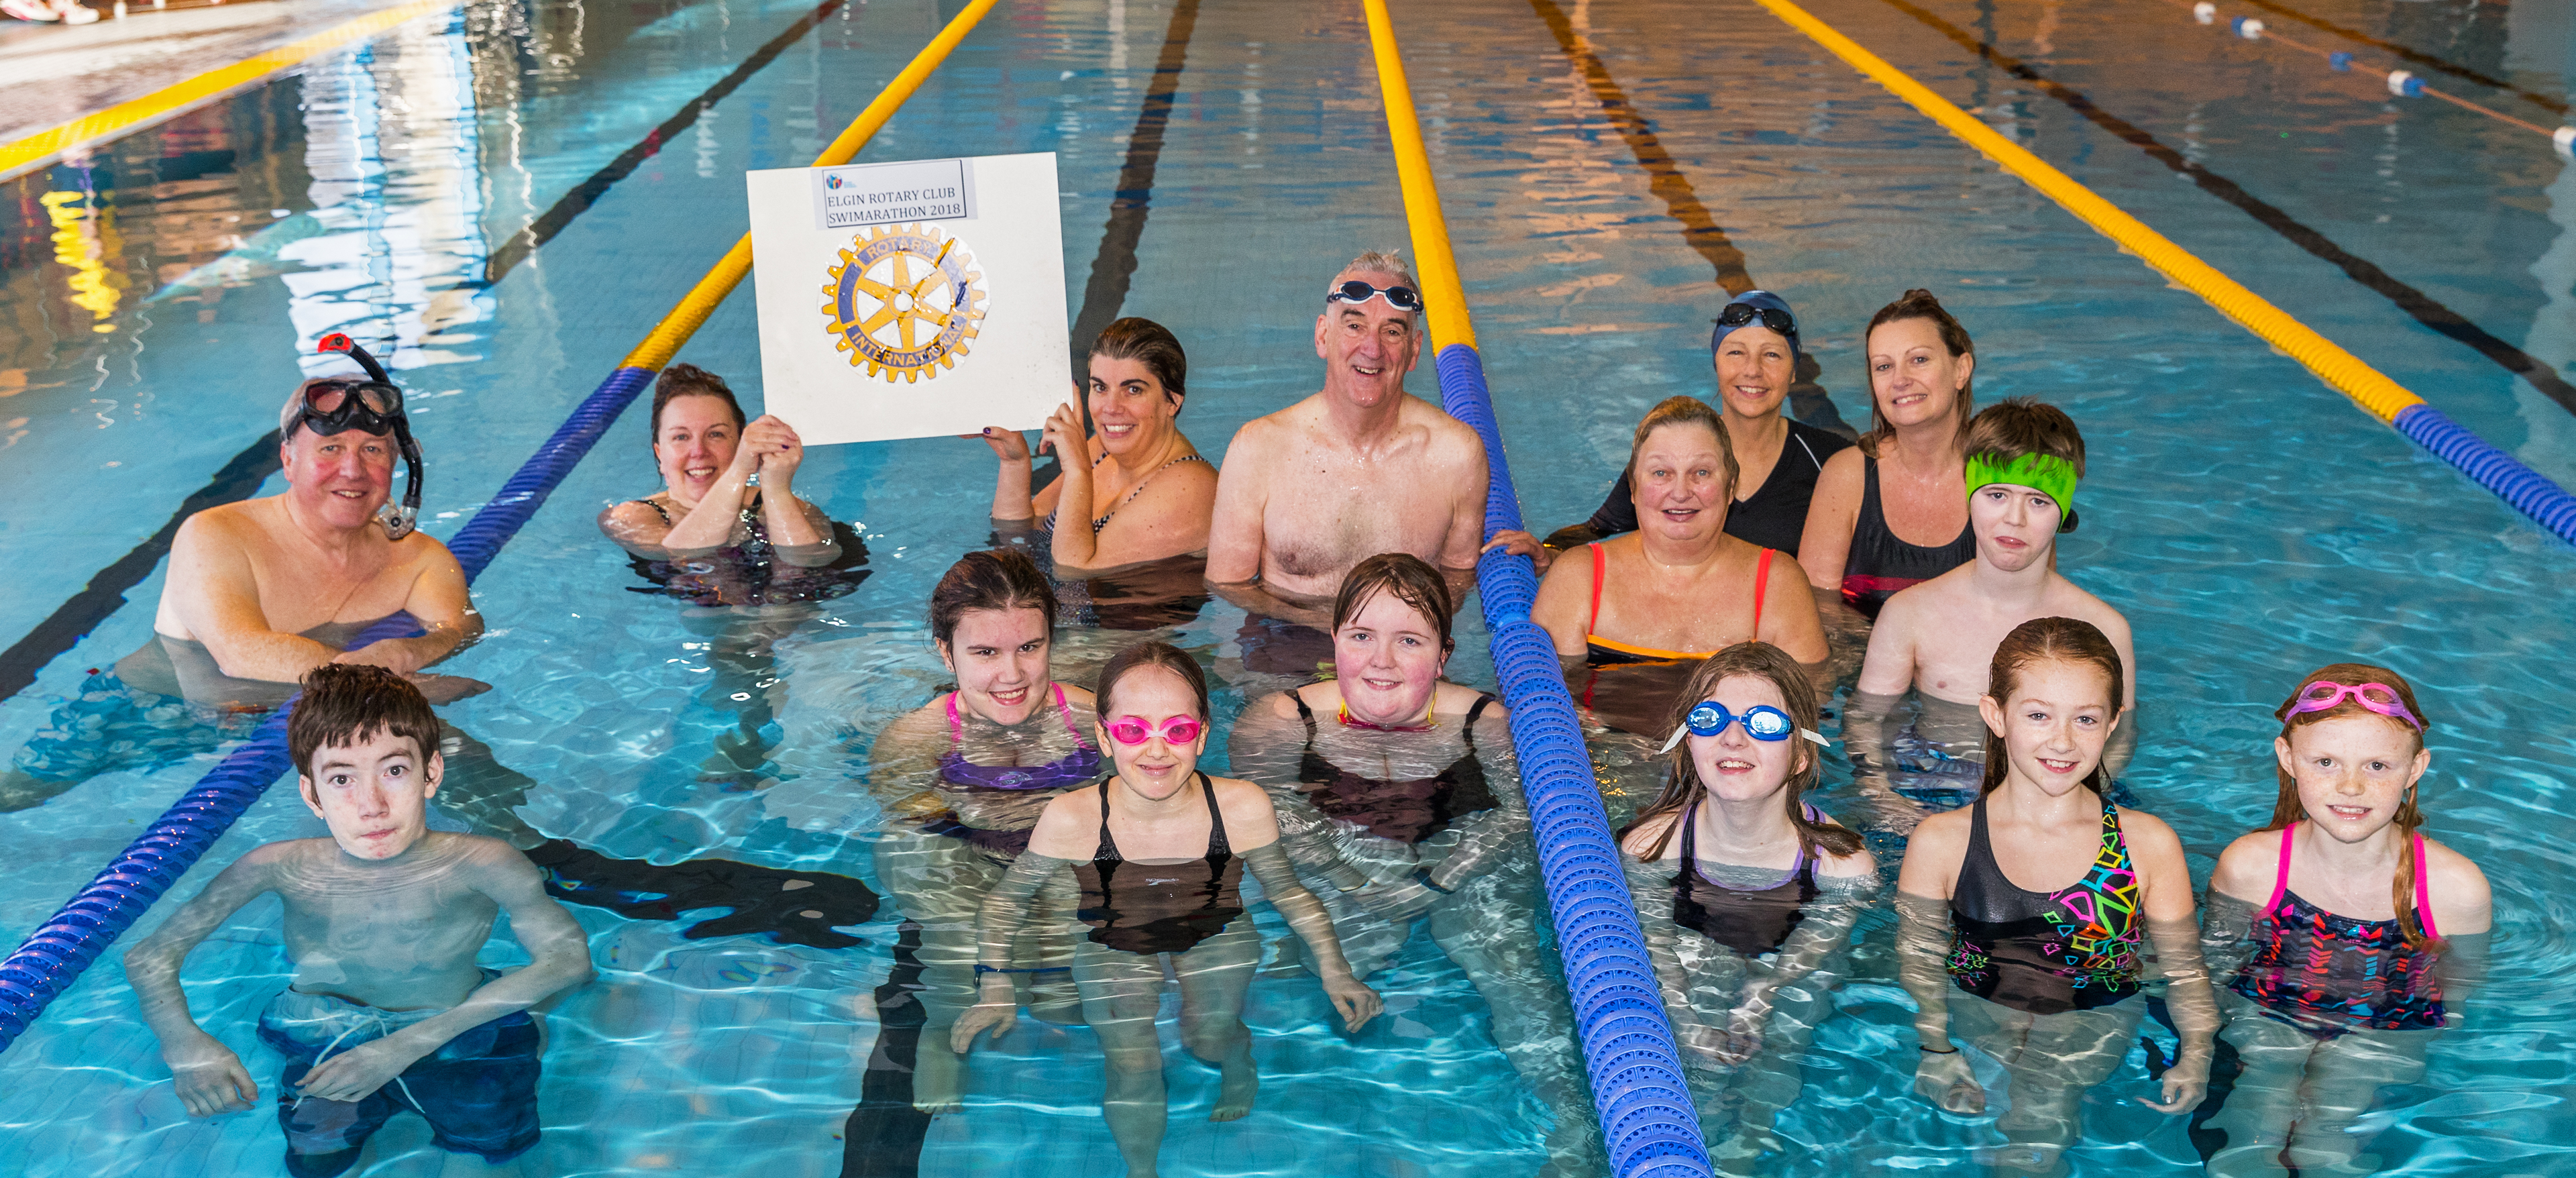 Nearly 40 swimmers took part in the fundraiser.